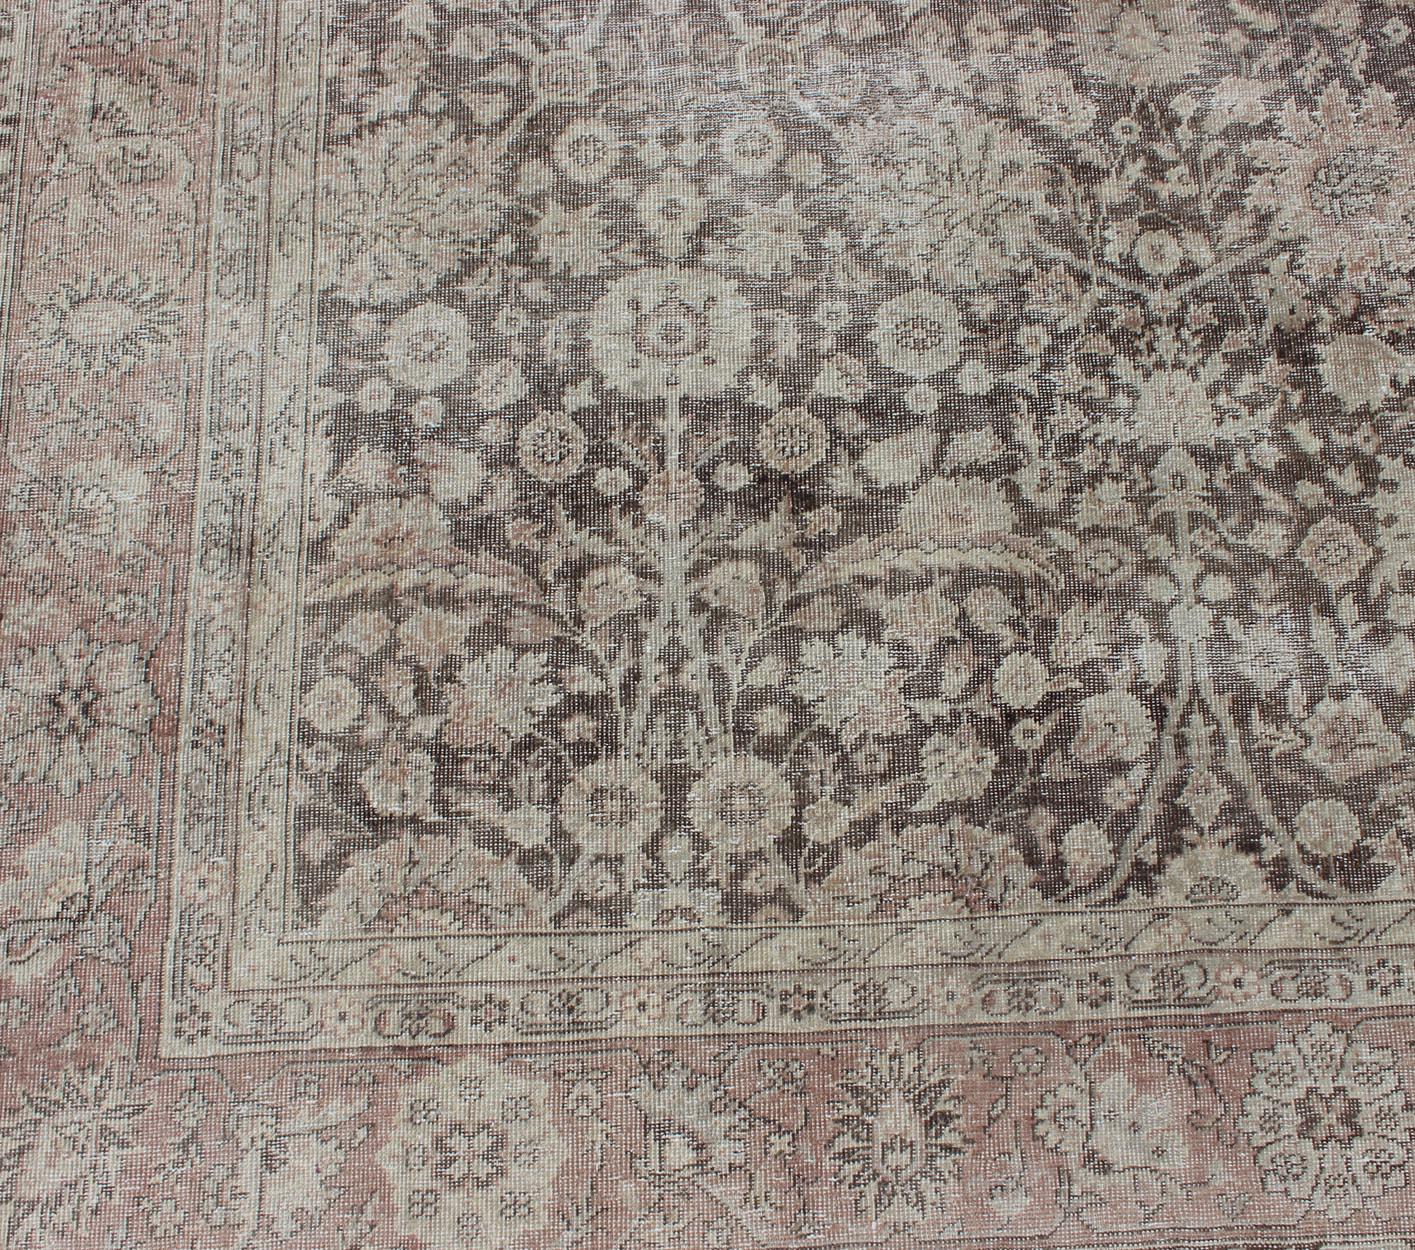 Antique Turkish Oushak Rug with All-Over Floral Design in Earth Tones For Sale 7